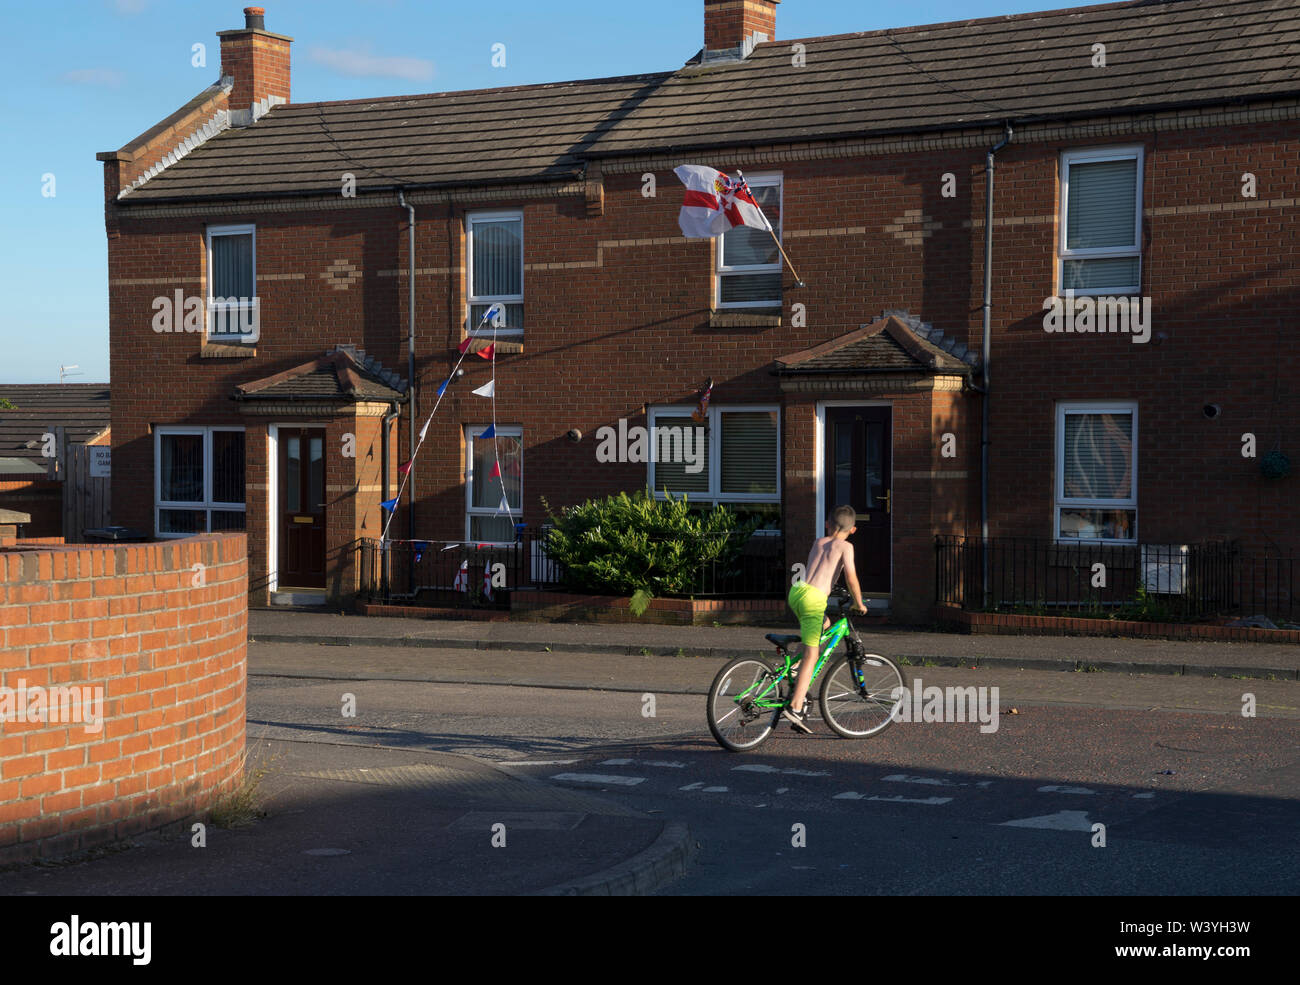 Child on a bicycle with loyalist flags and banners in background in the Shankhill area of Belfast ,Northern Ireland Stock Photo